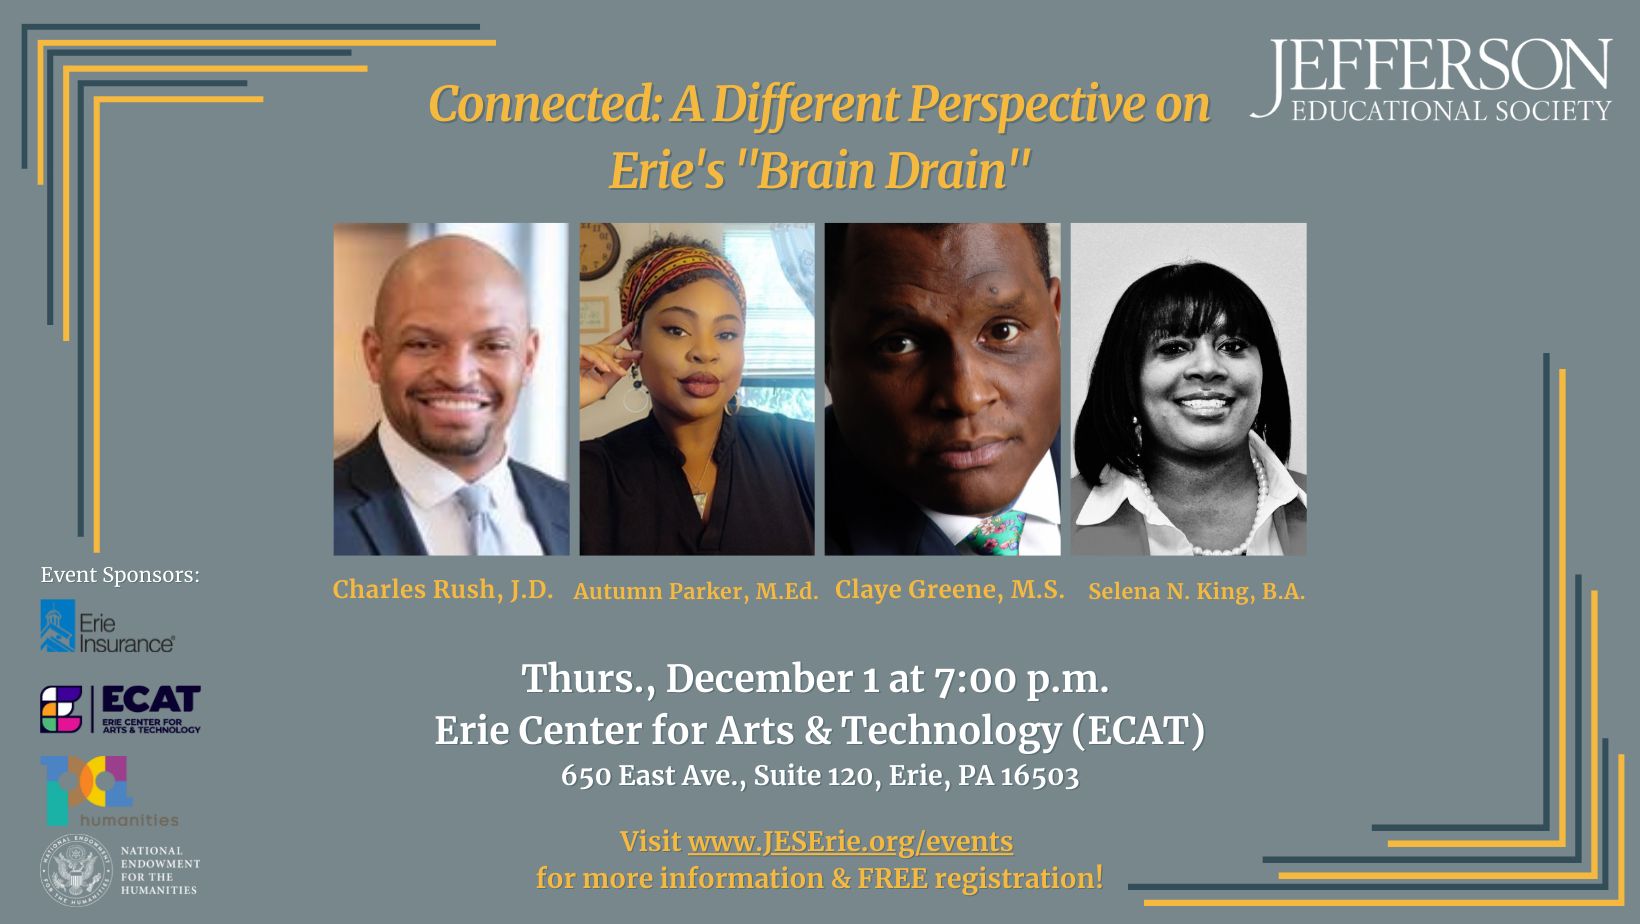 Connected: A Different Perspective on Erie's "Brain Drain", Erie, Pennsylvania, United States